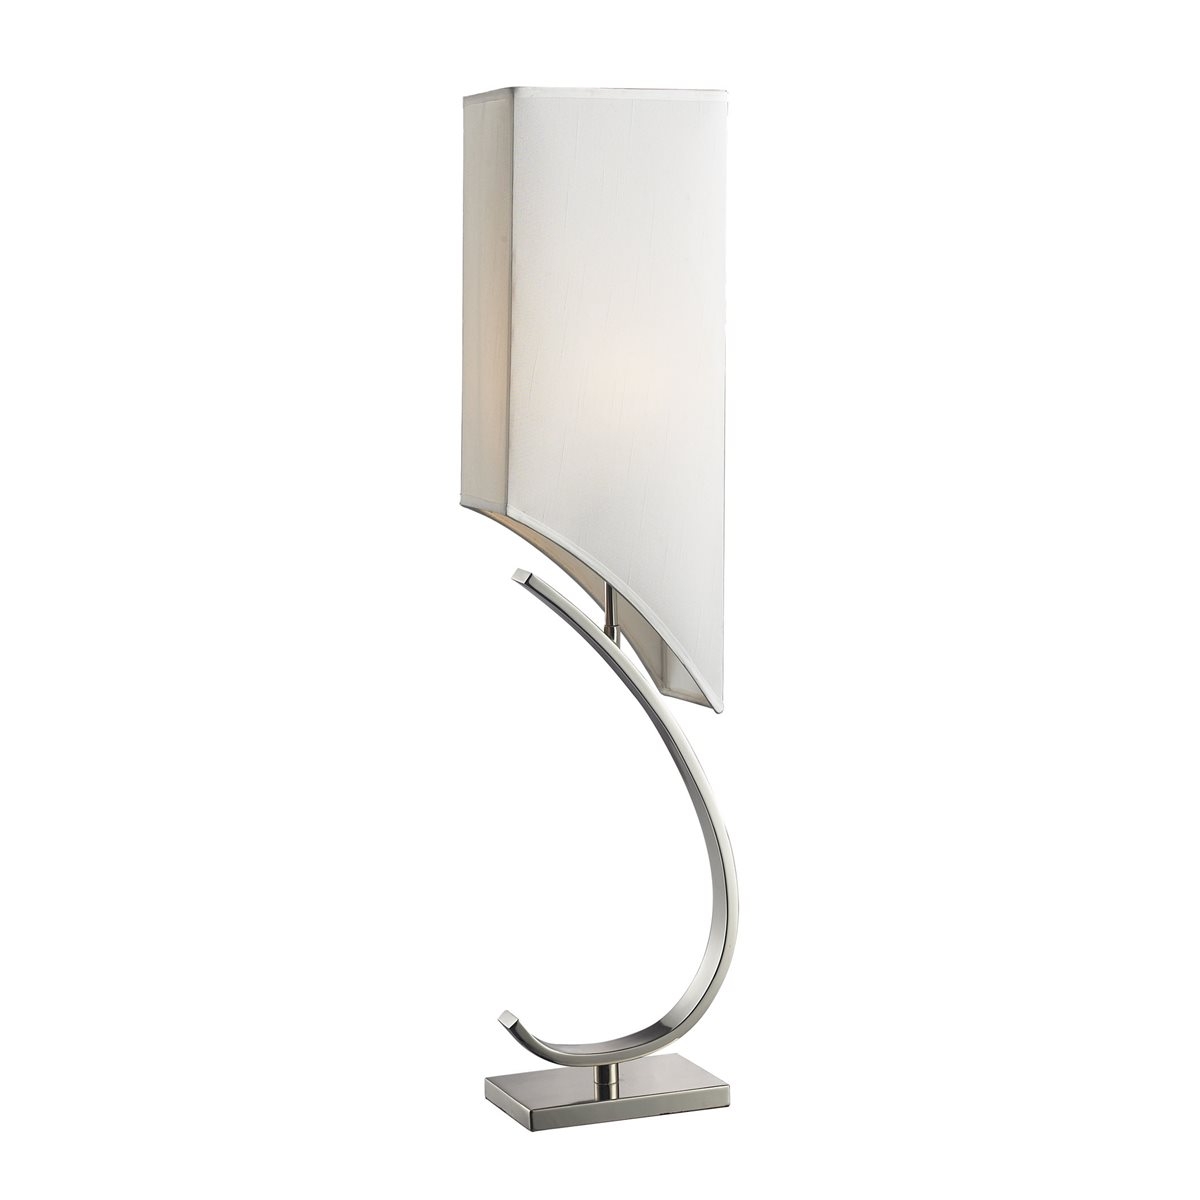 TABLE LAMP IN CHROME FINISH WITH WHITE FAUX SILK LAMP SHADE - Image 0